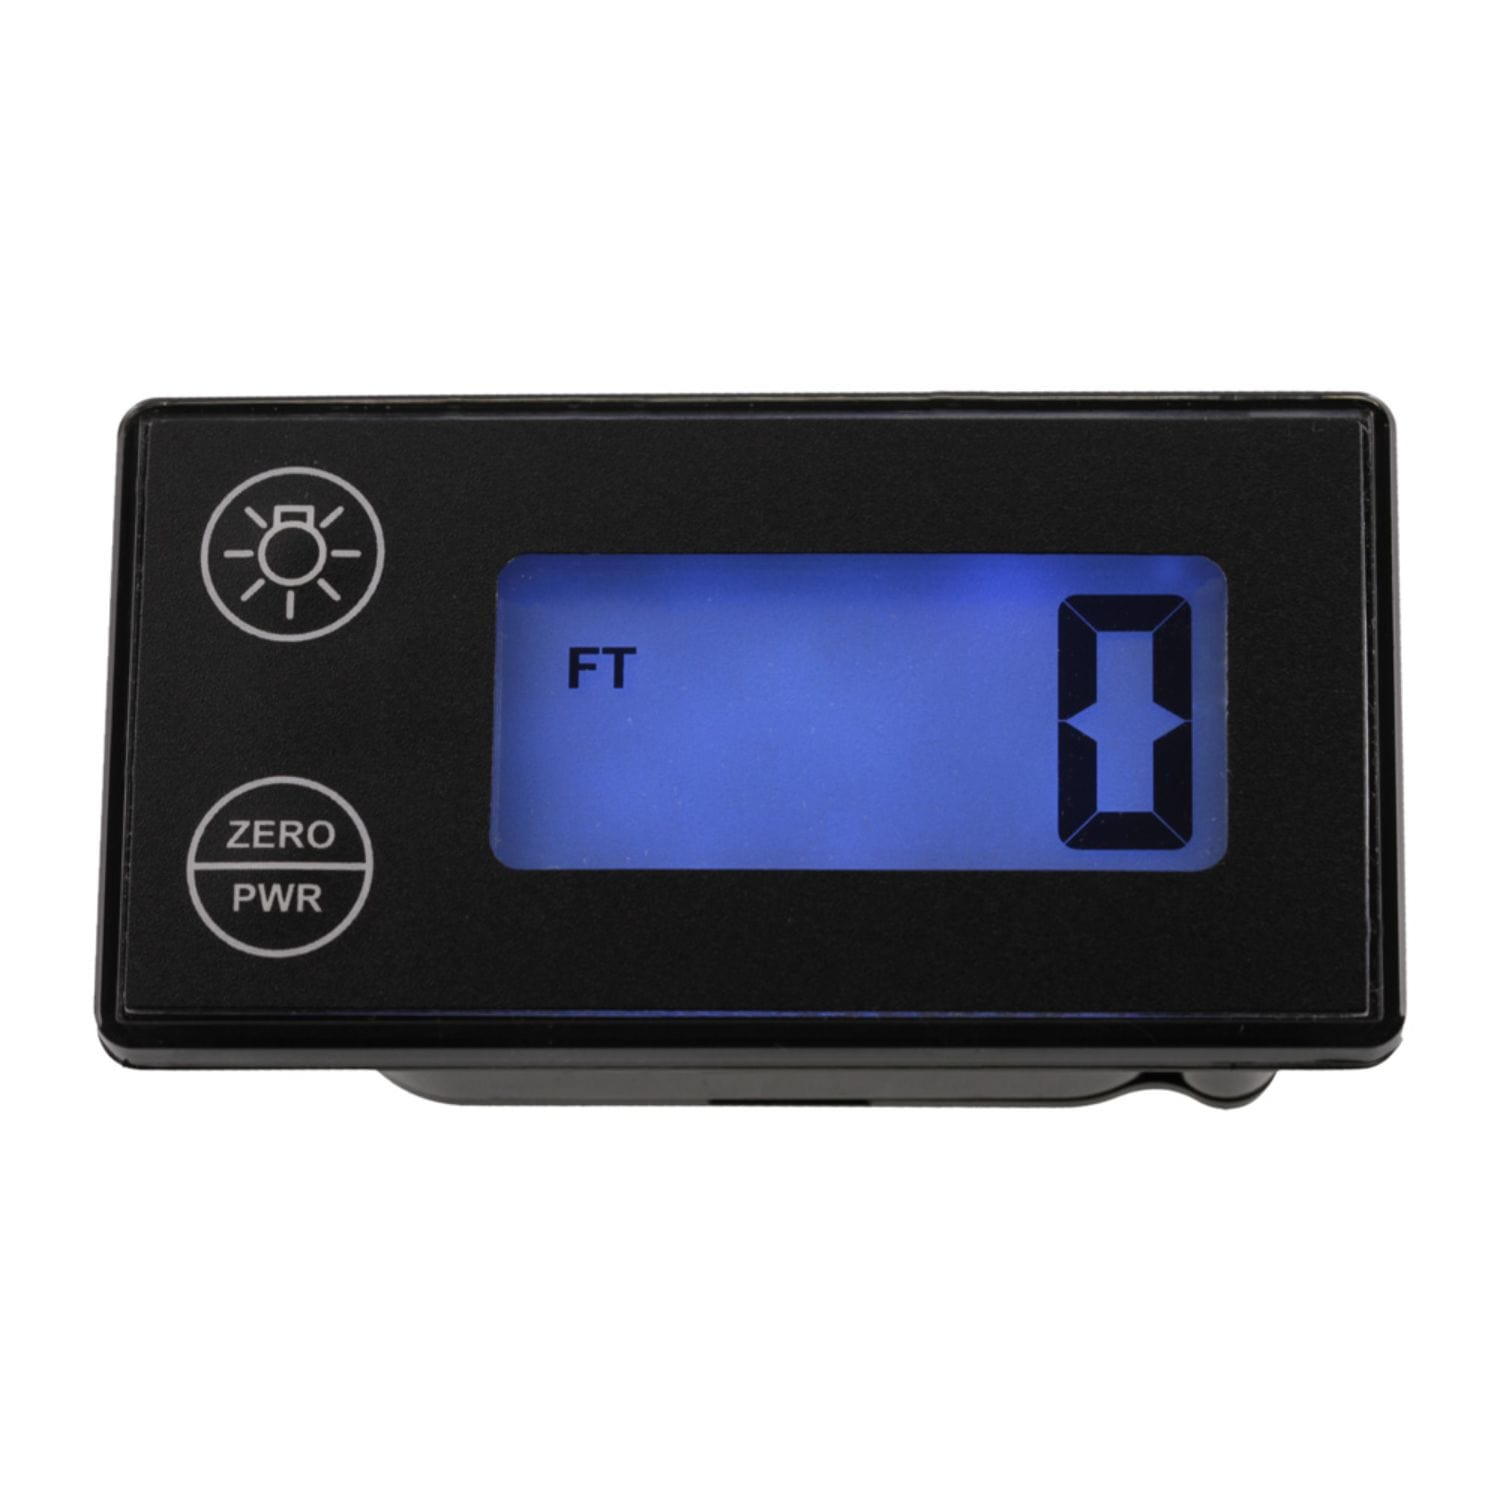 Scotty Fishing Marine/Water Sports : Accessories Scotty HP Electric Downrigger Digital Counter